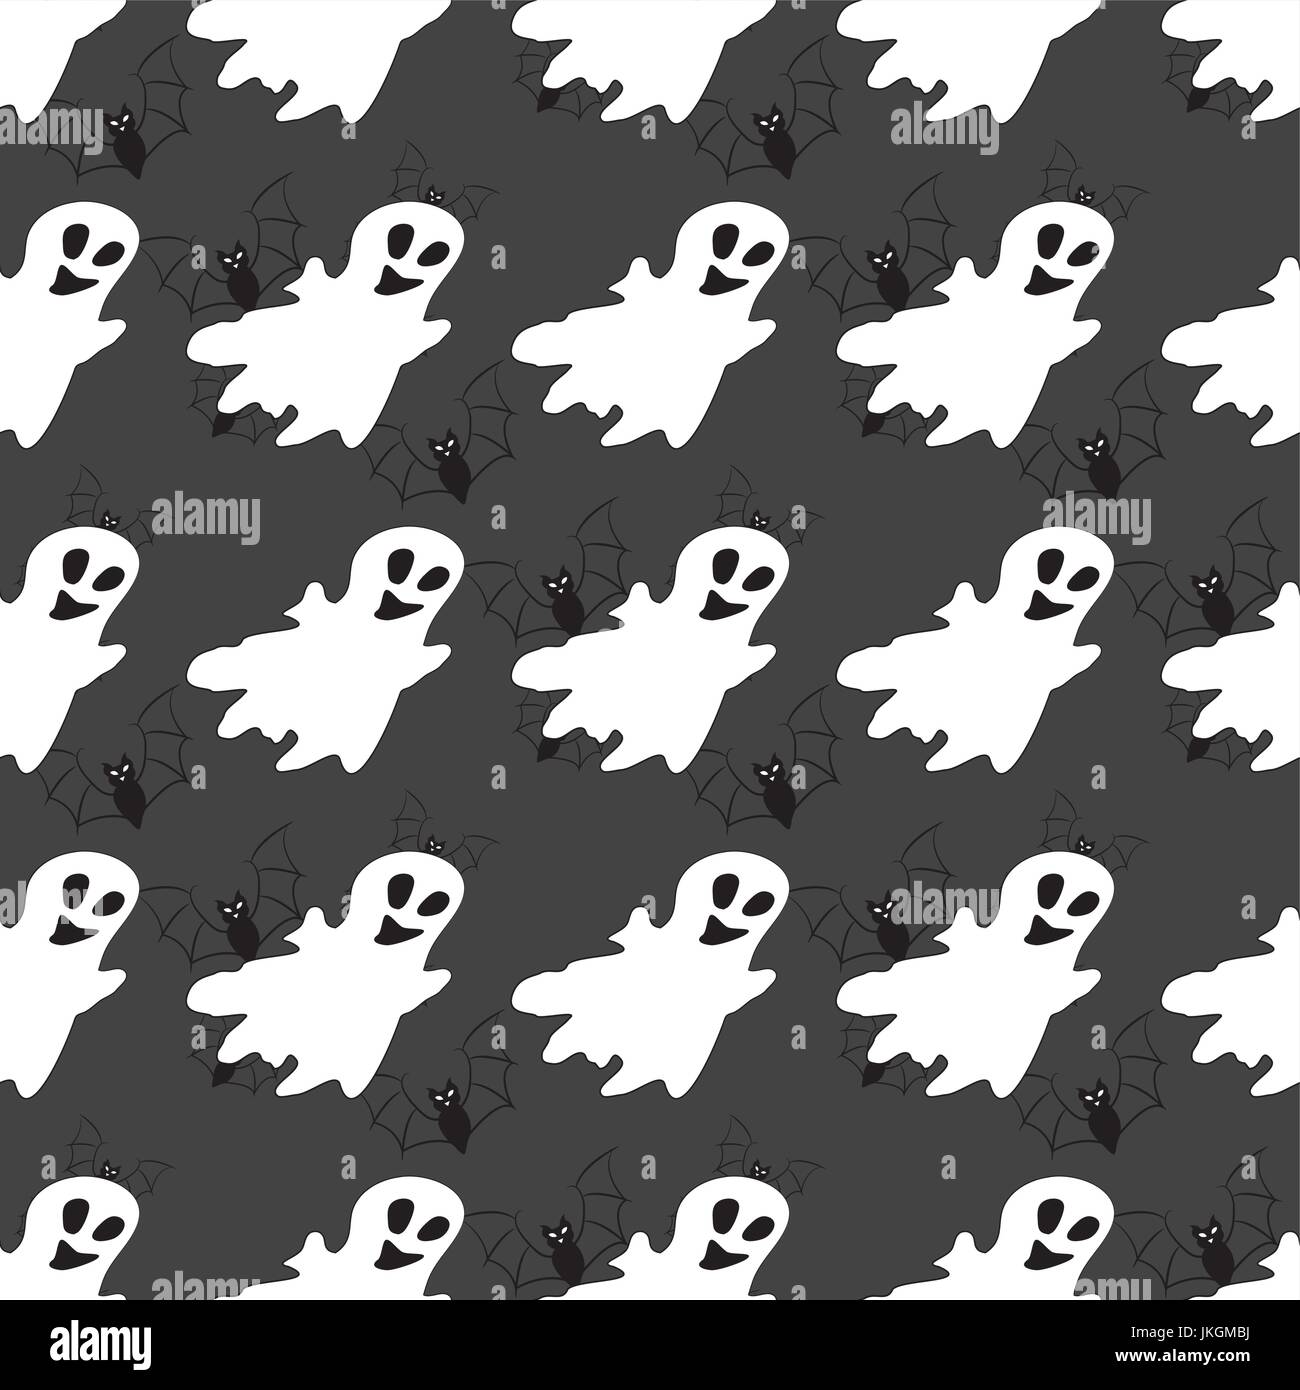 Seamless pattern with white ghosts. Seamless pattern can be used for wallpaper, pattern fills, web page backgrounds, surface textures. Stock Vector